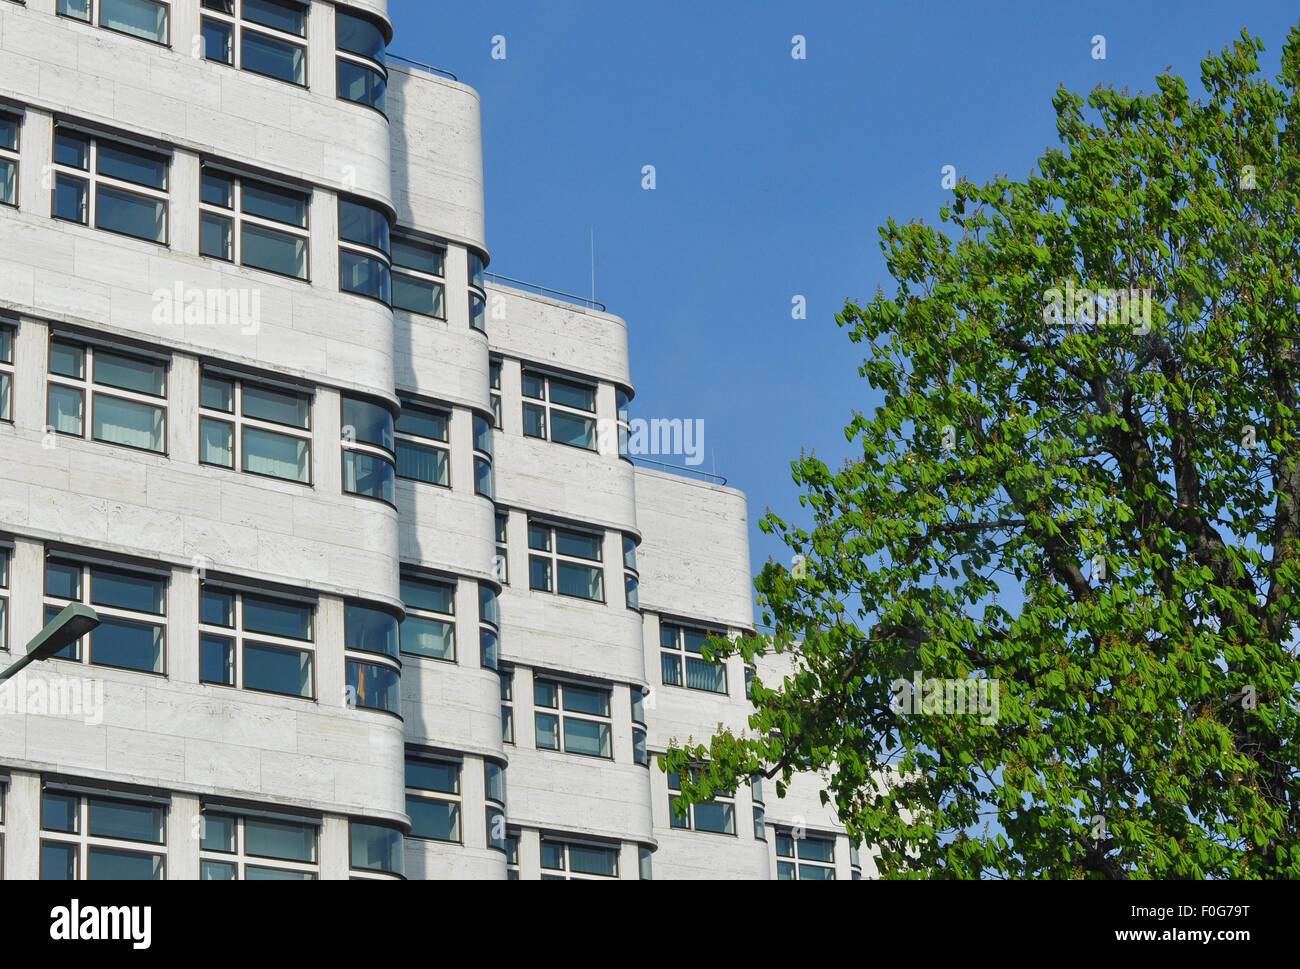 The famous Shellhaus, built by Emil Fahrenkamp in 1931, Berlin, Germany. One of the nicest Berlin buildings under monumental protection. Stock Photo